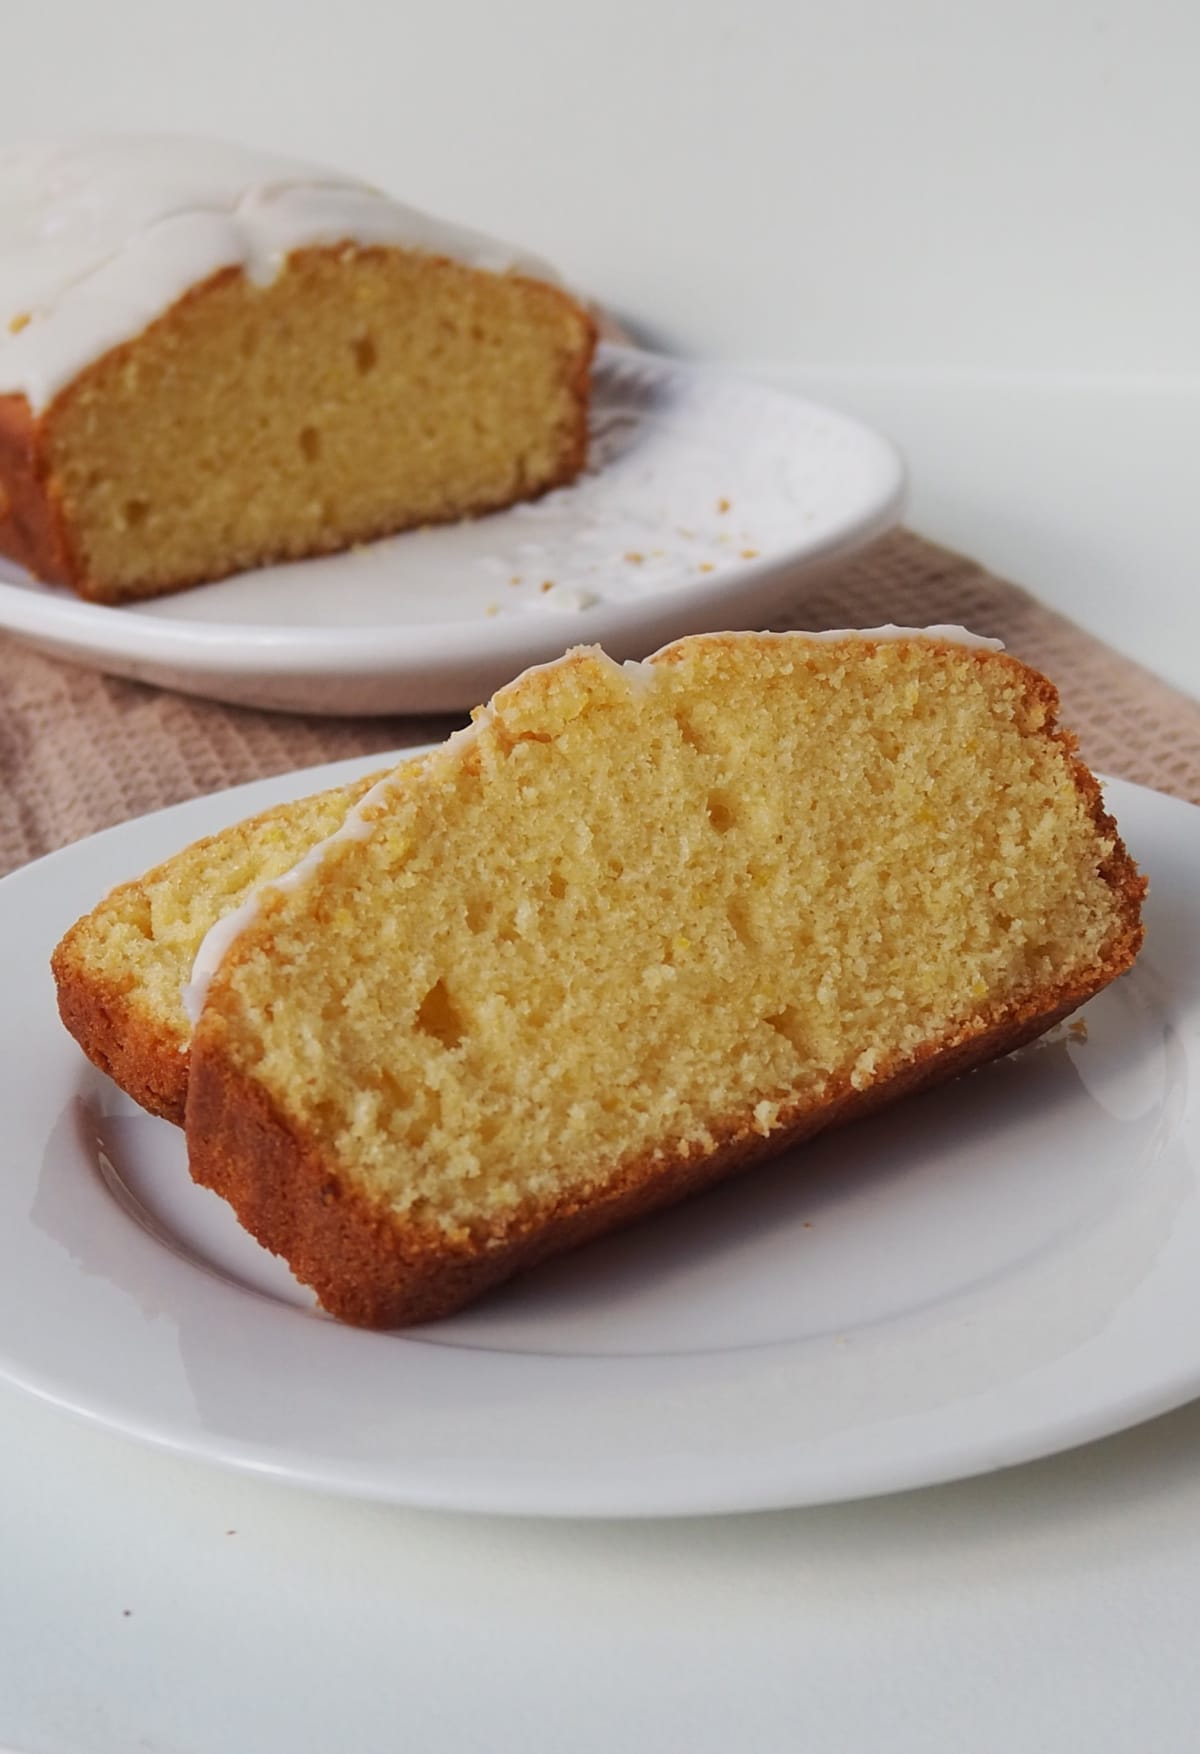 Front side view of Two slices of Orange butter cake on a white plate. in the background is the rest of the cake on a white serving platter.